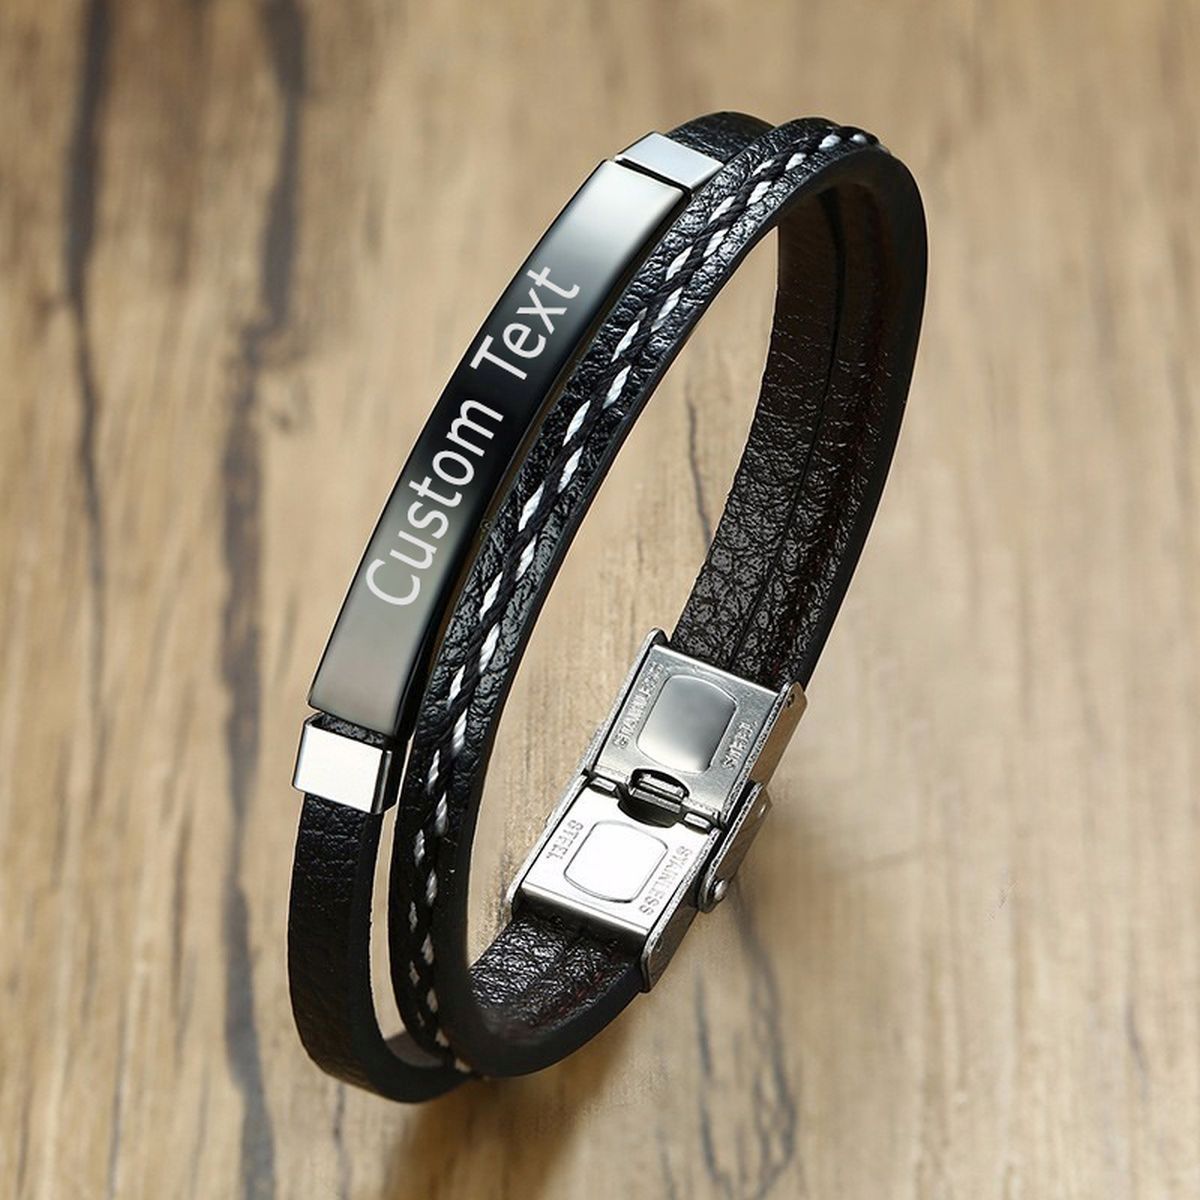 Top Benefits Of Custom Rubber Wristband Not To Miss Out